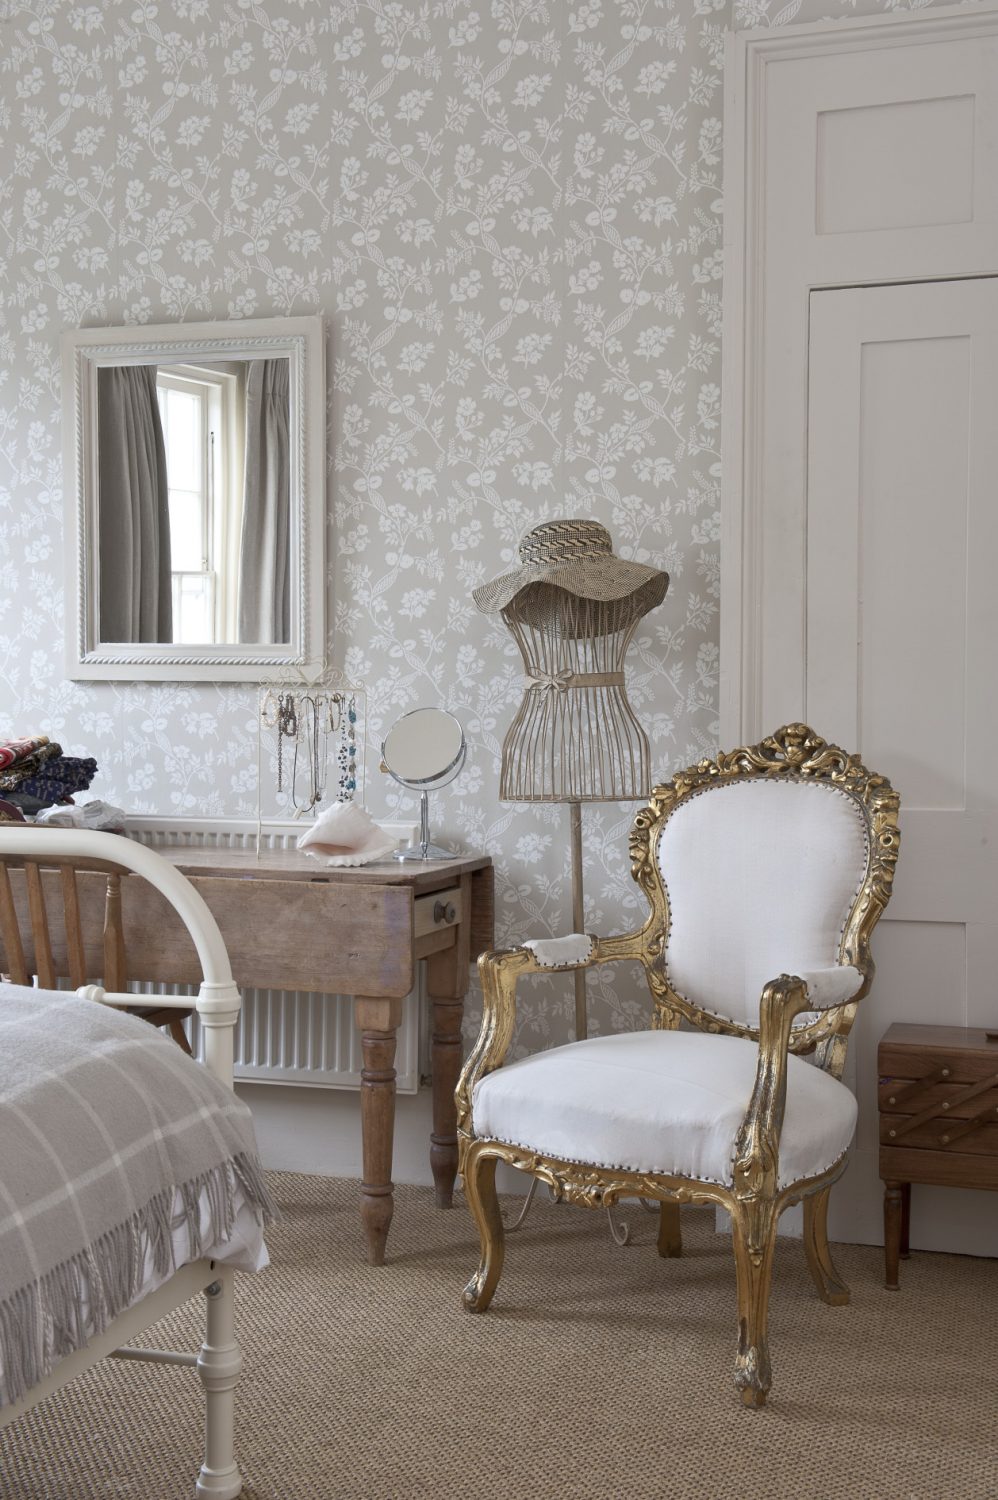 Colefax and Fowler wallpaper takes centre stage in one of Belinda’s daughters’ rooms